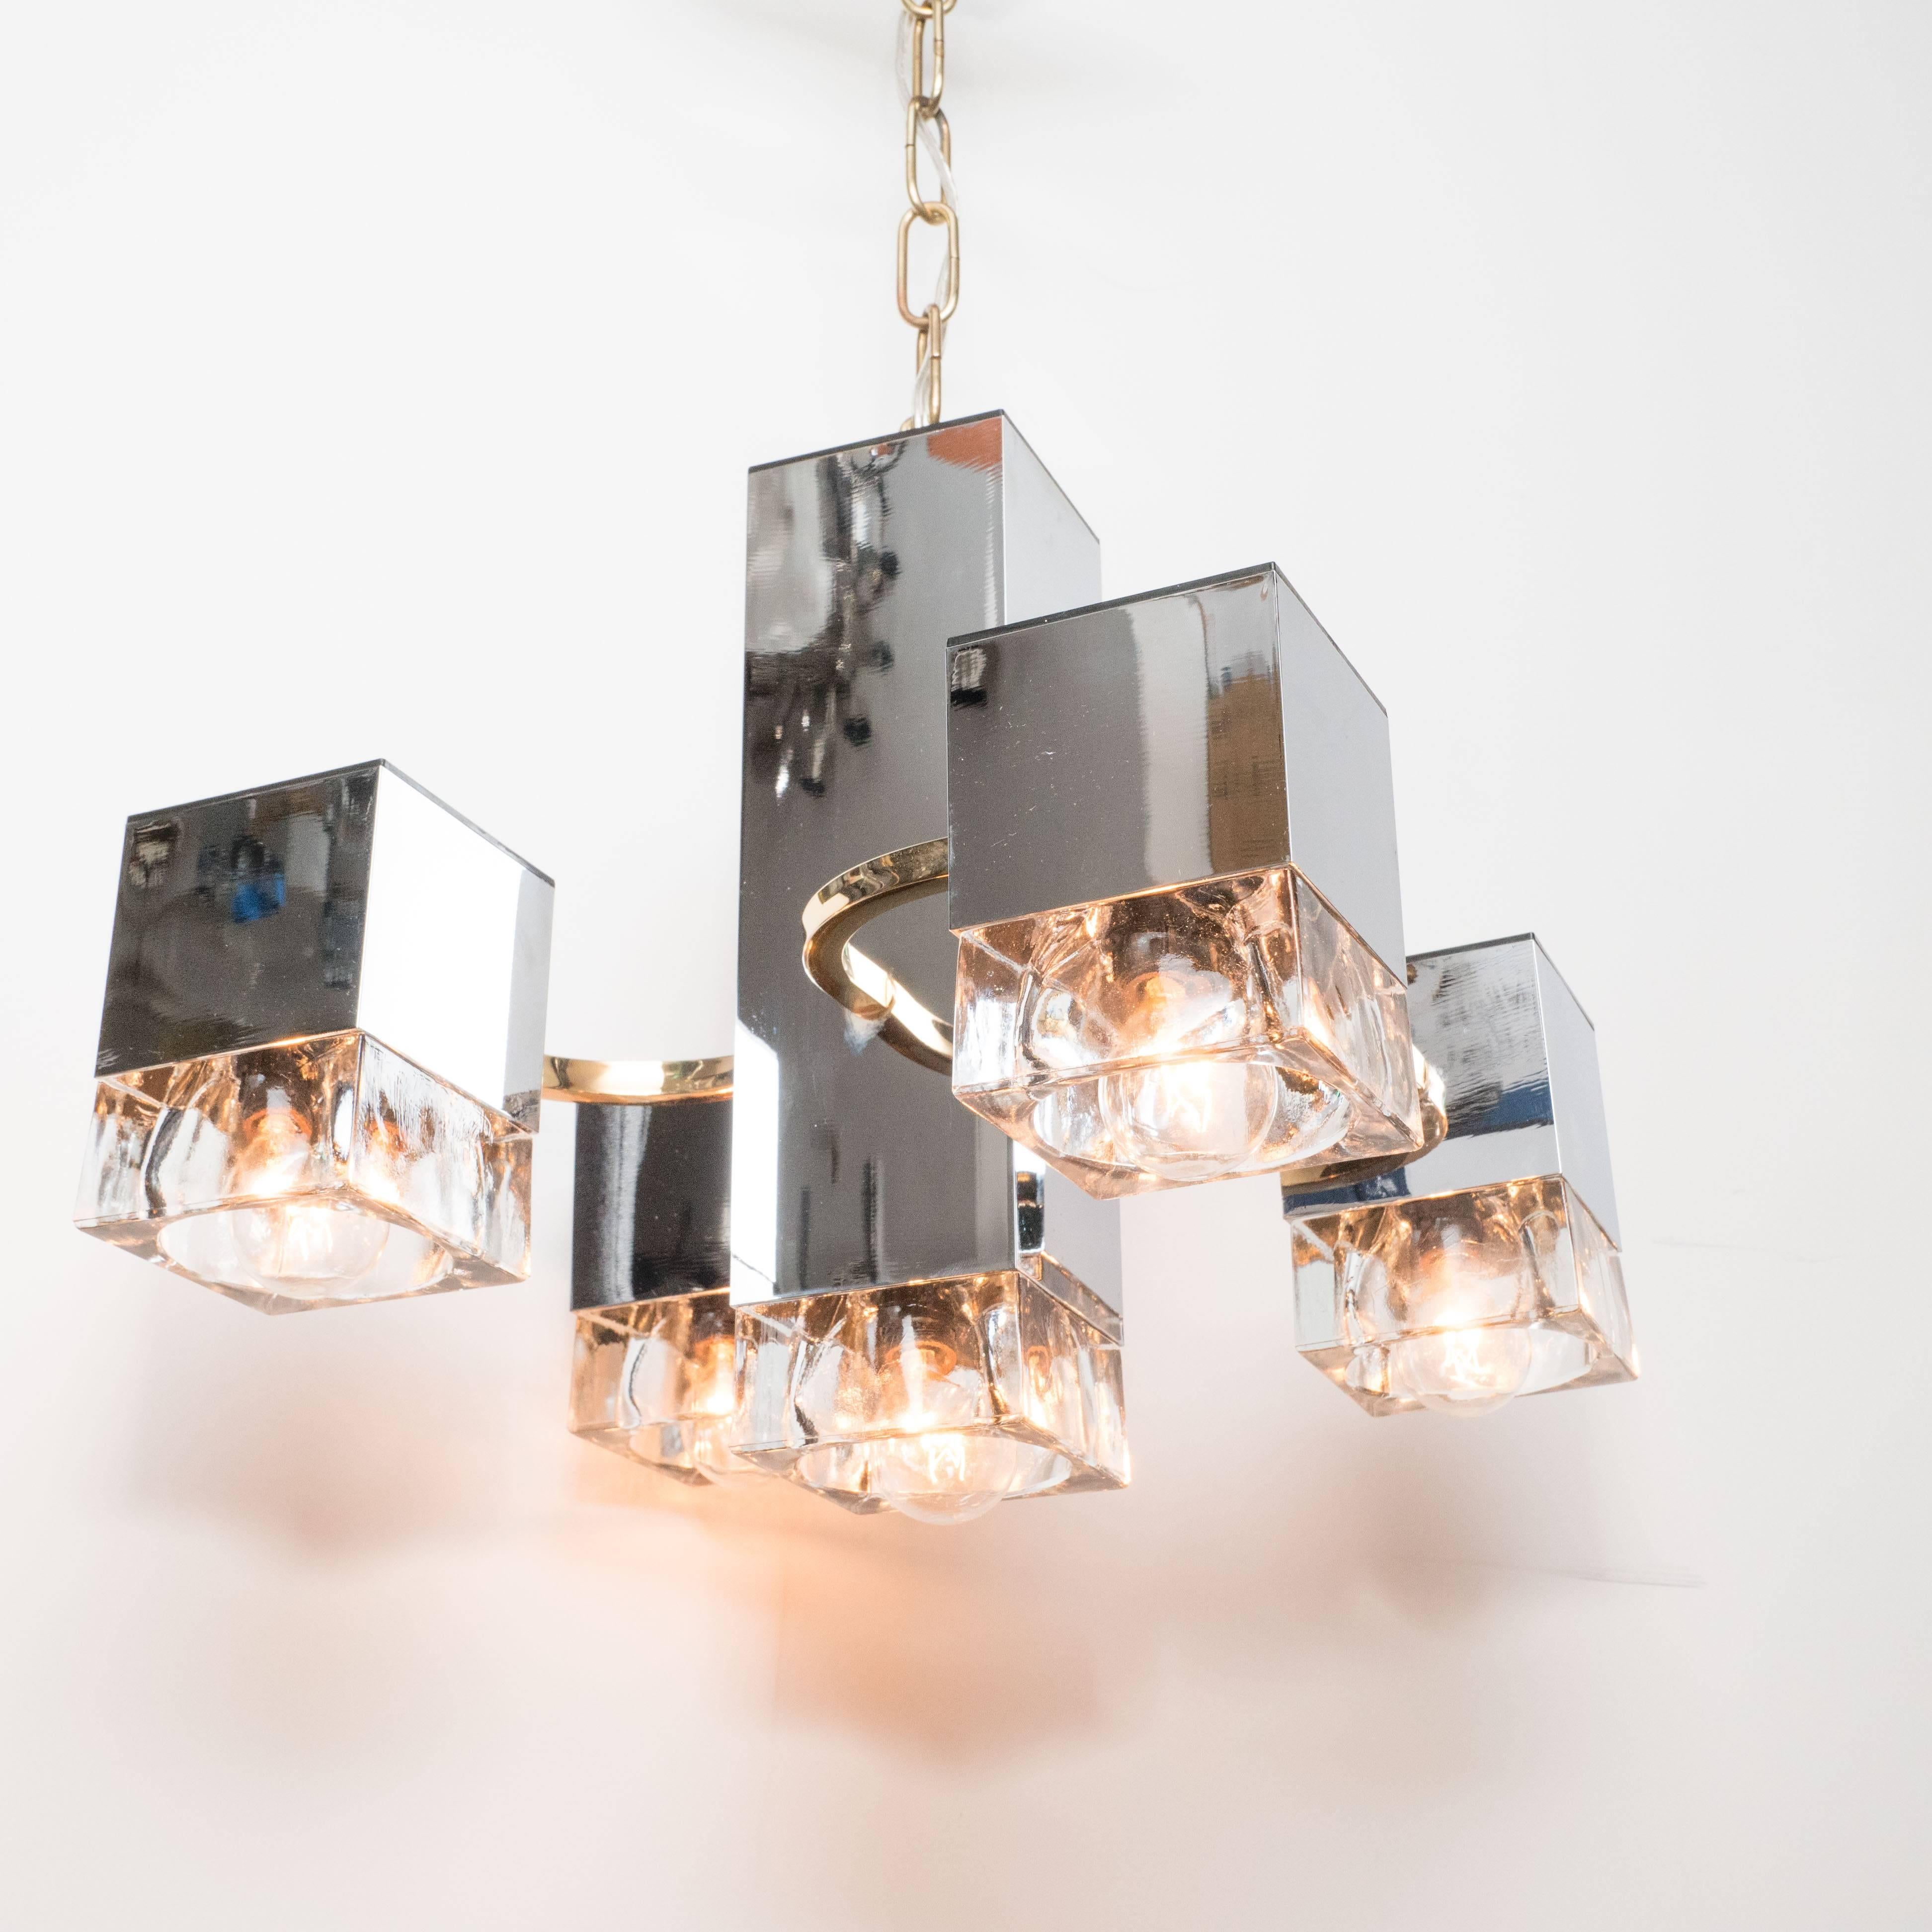 This elegant Scolari chandelier features a central rectangular pillar in chrome with four chrome cube forms attached with curved brass arms. This fixture embodies sophisticated Mid-Century Modern design at its most refined, and works well in